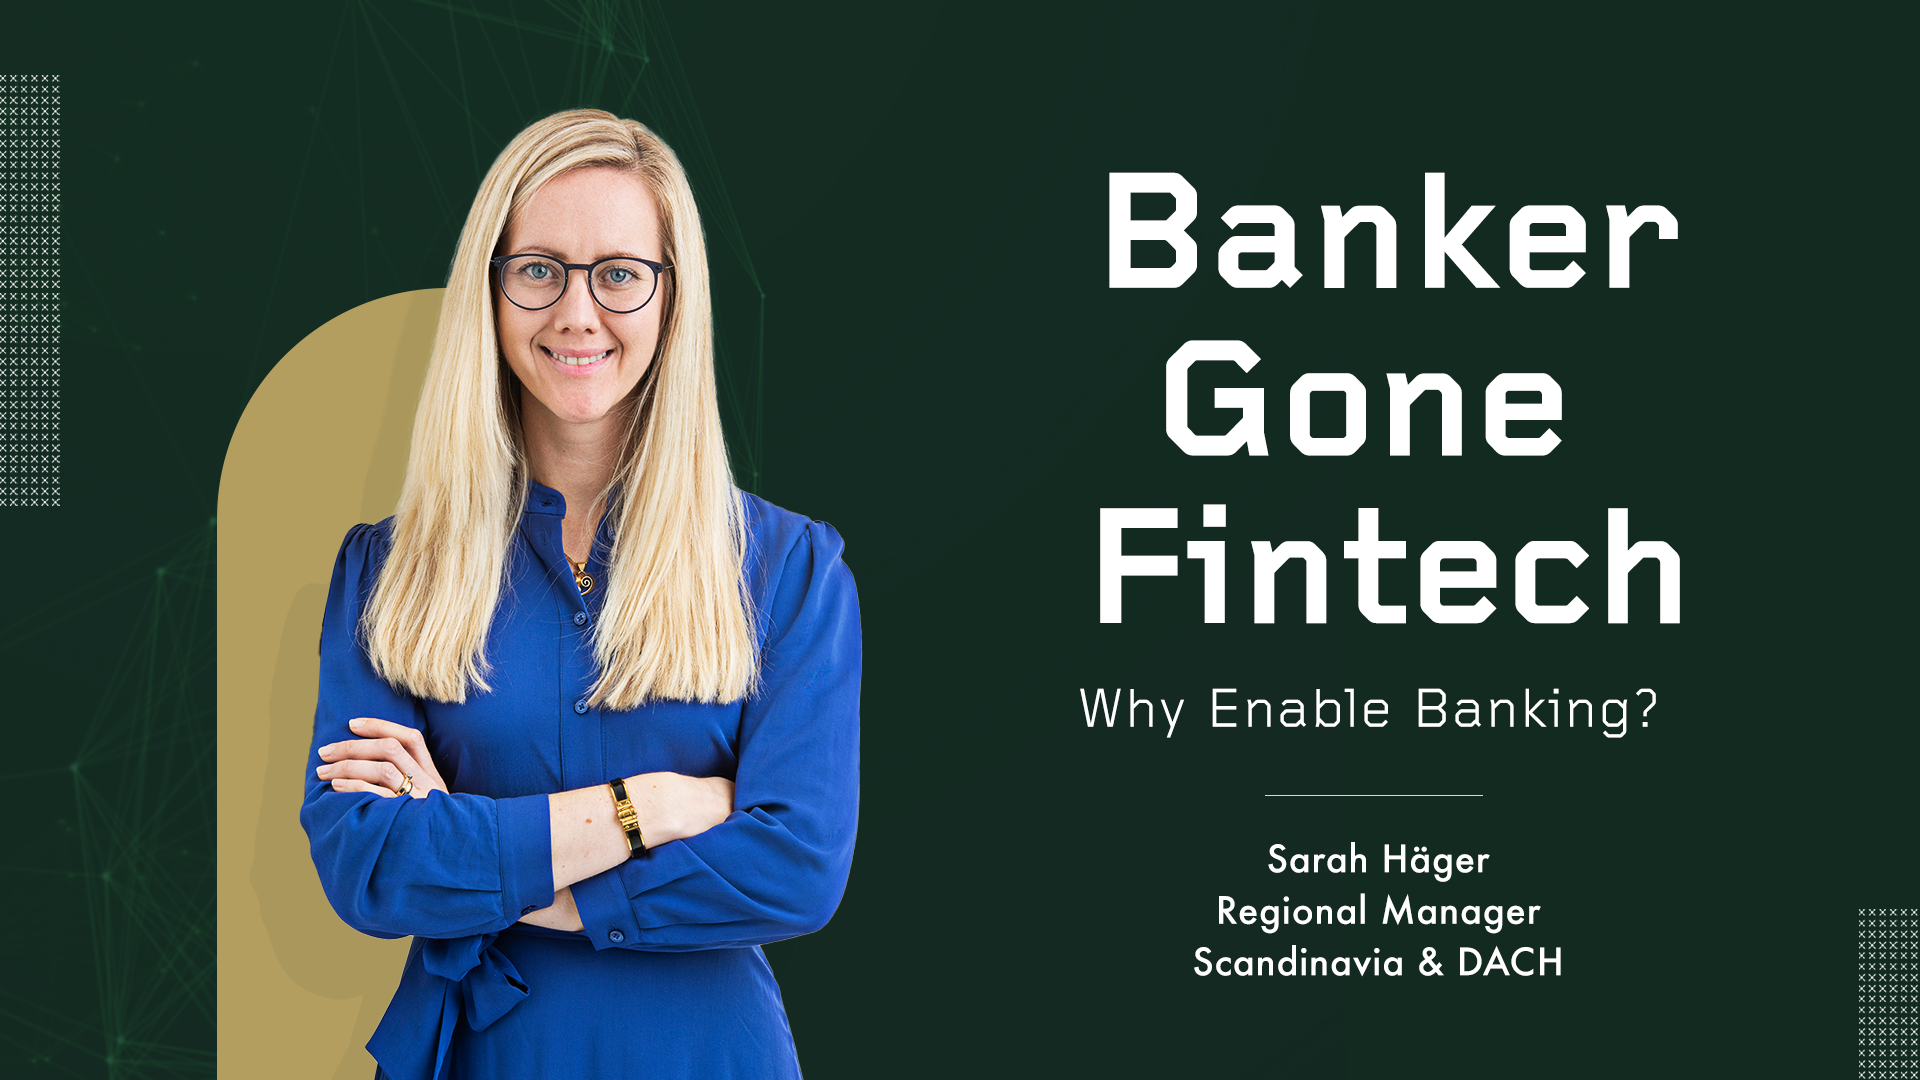 Banker Gone Fintech – Why Now?